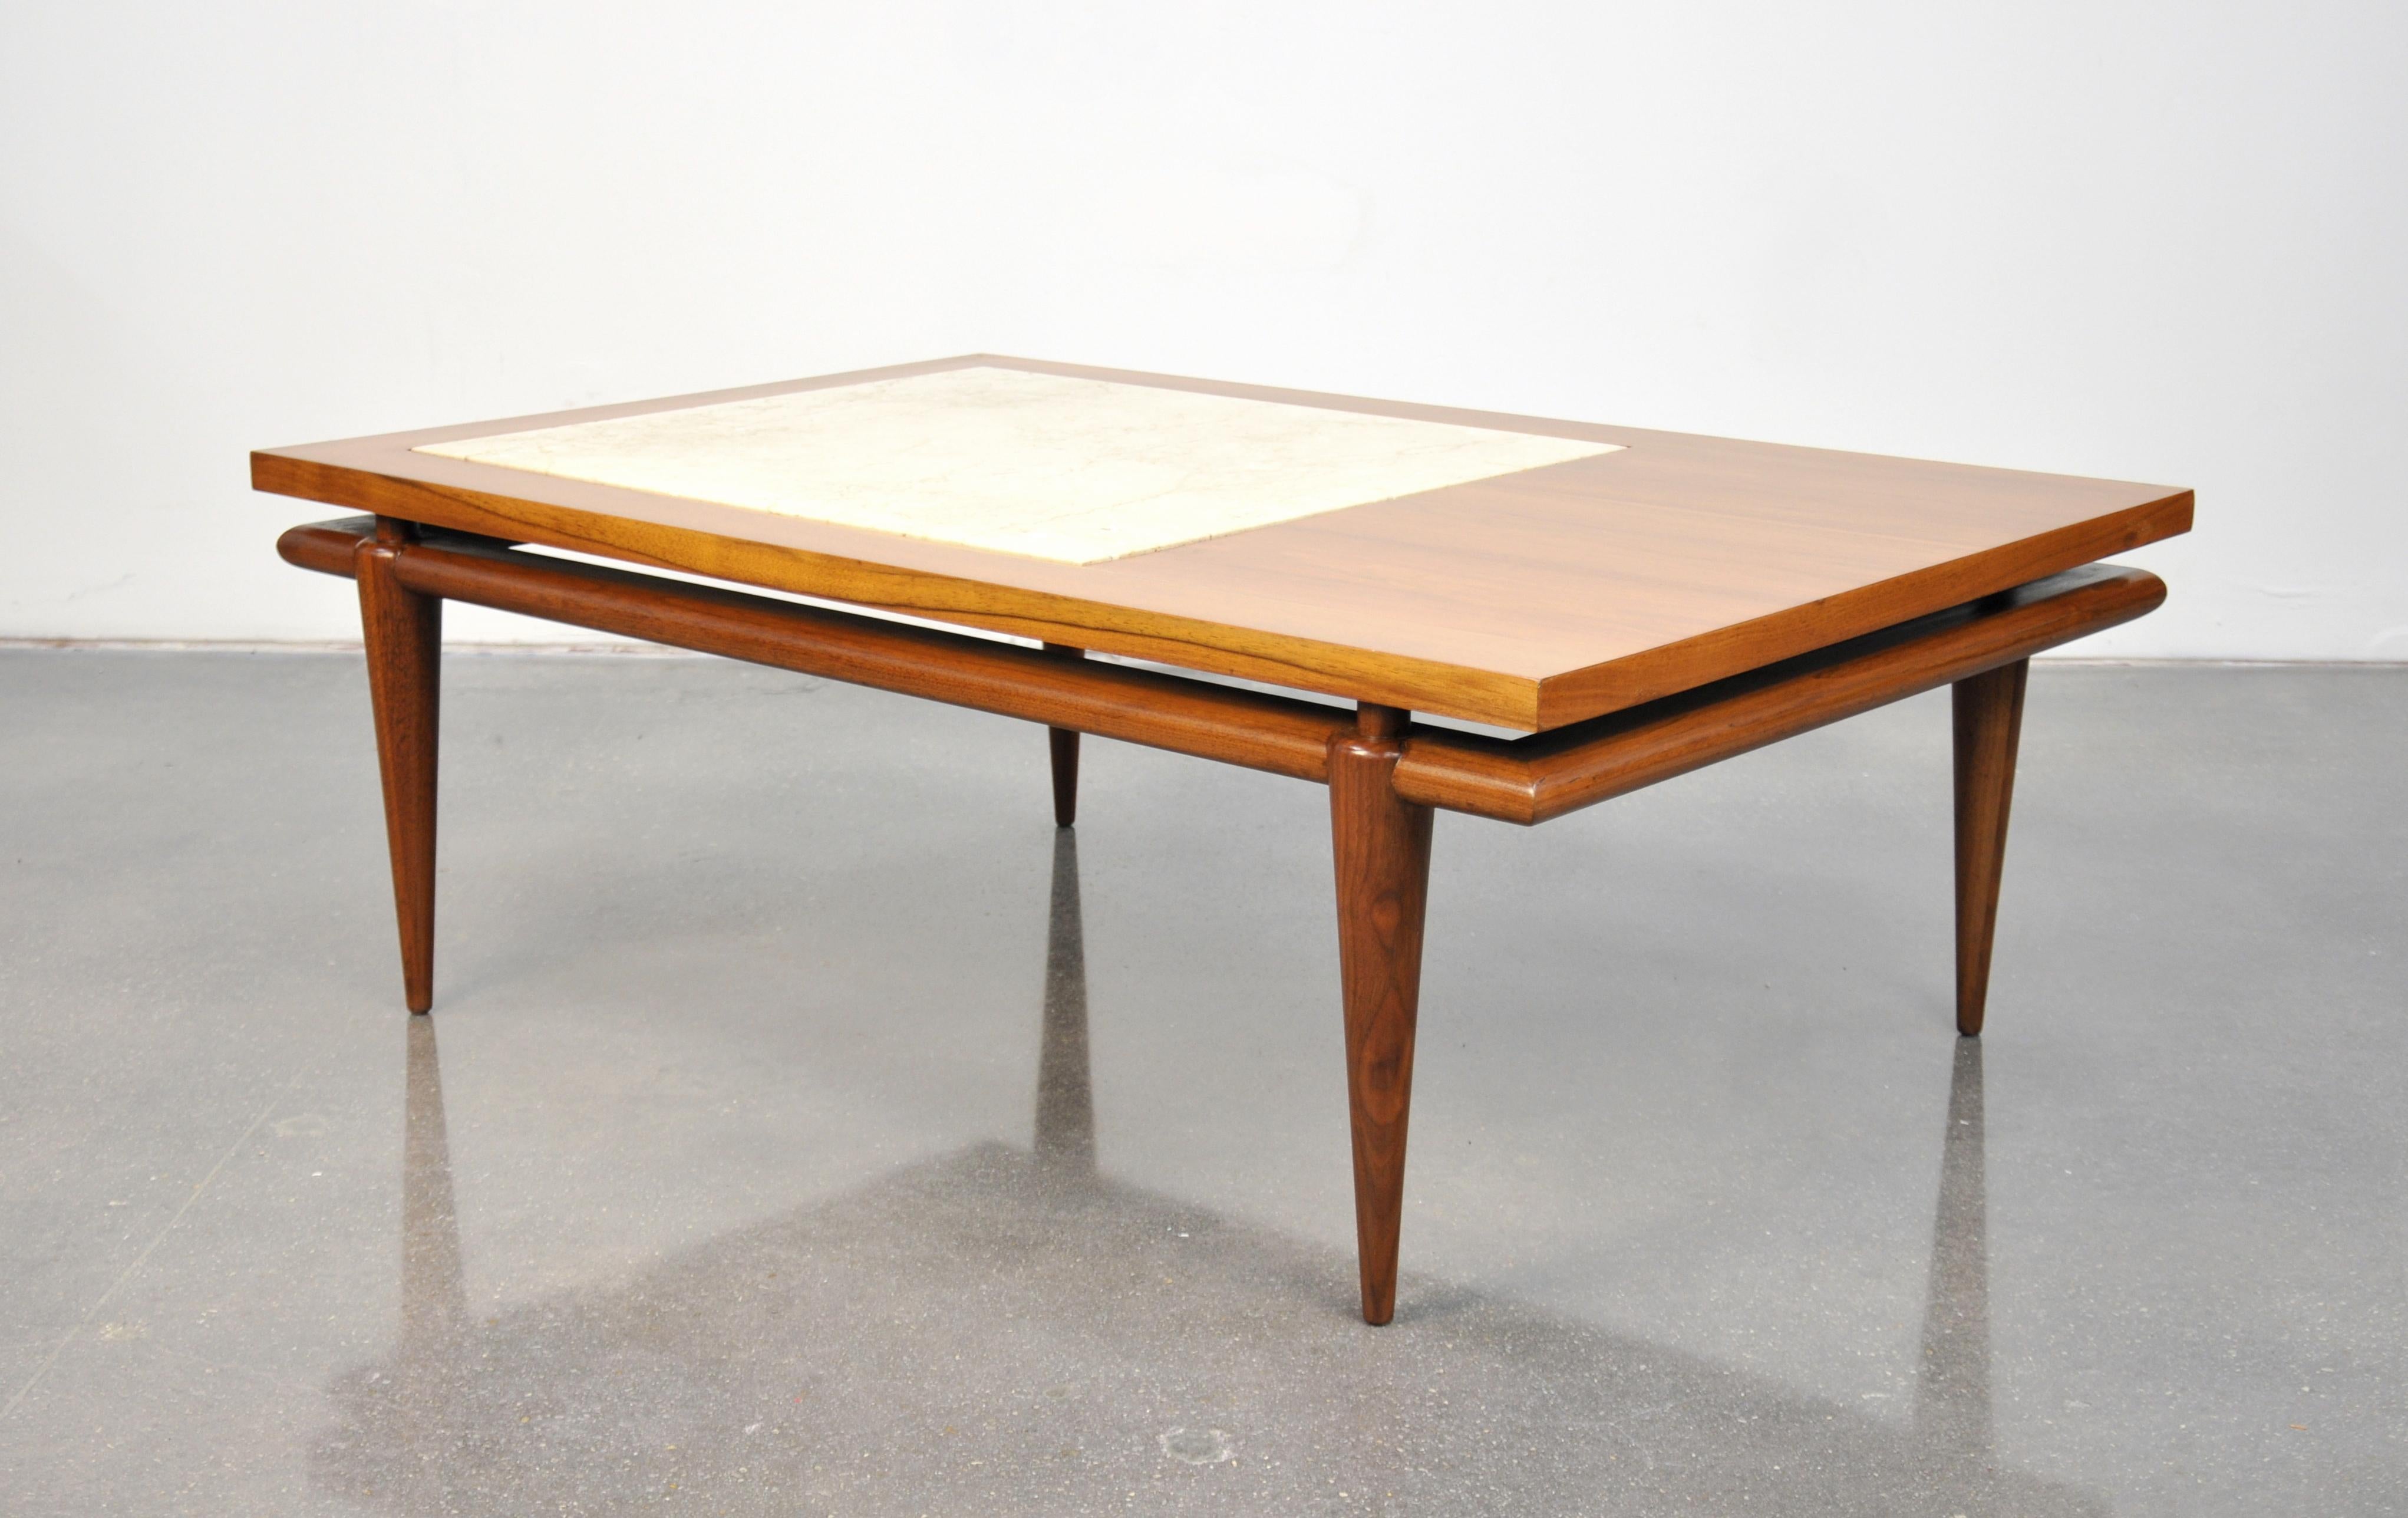 Marble Widdicomb Walnut and Travertine Coffee Table with Floating Top, 1960s